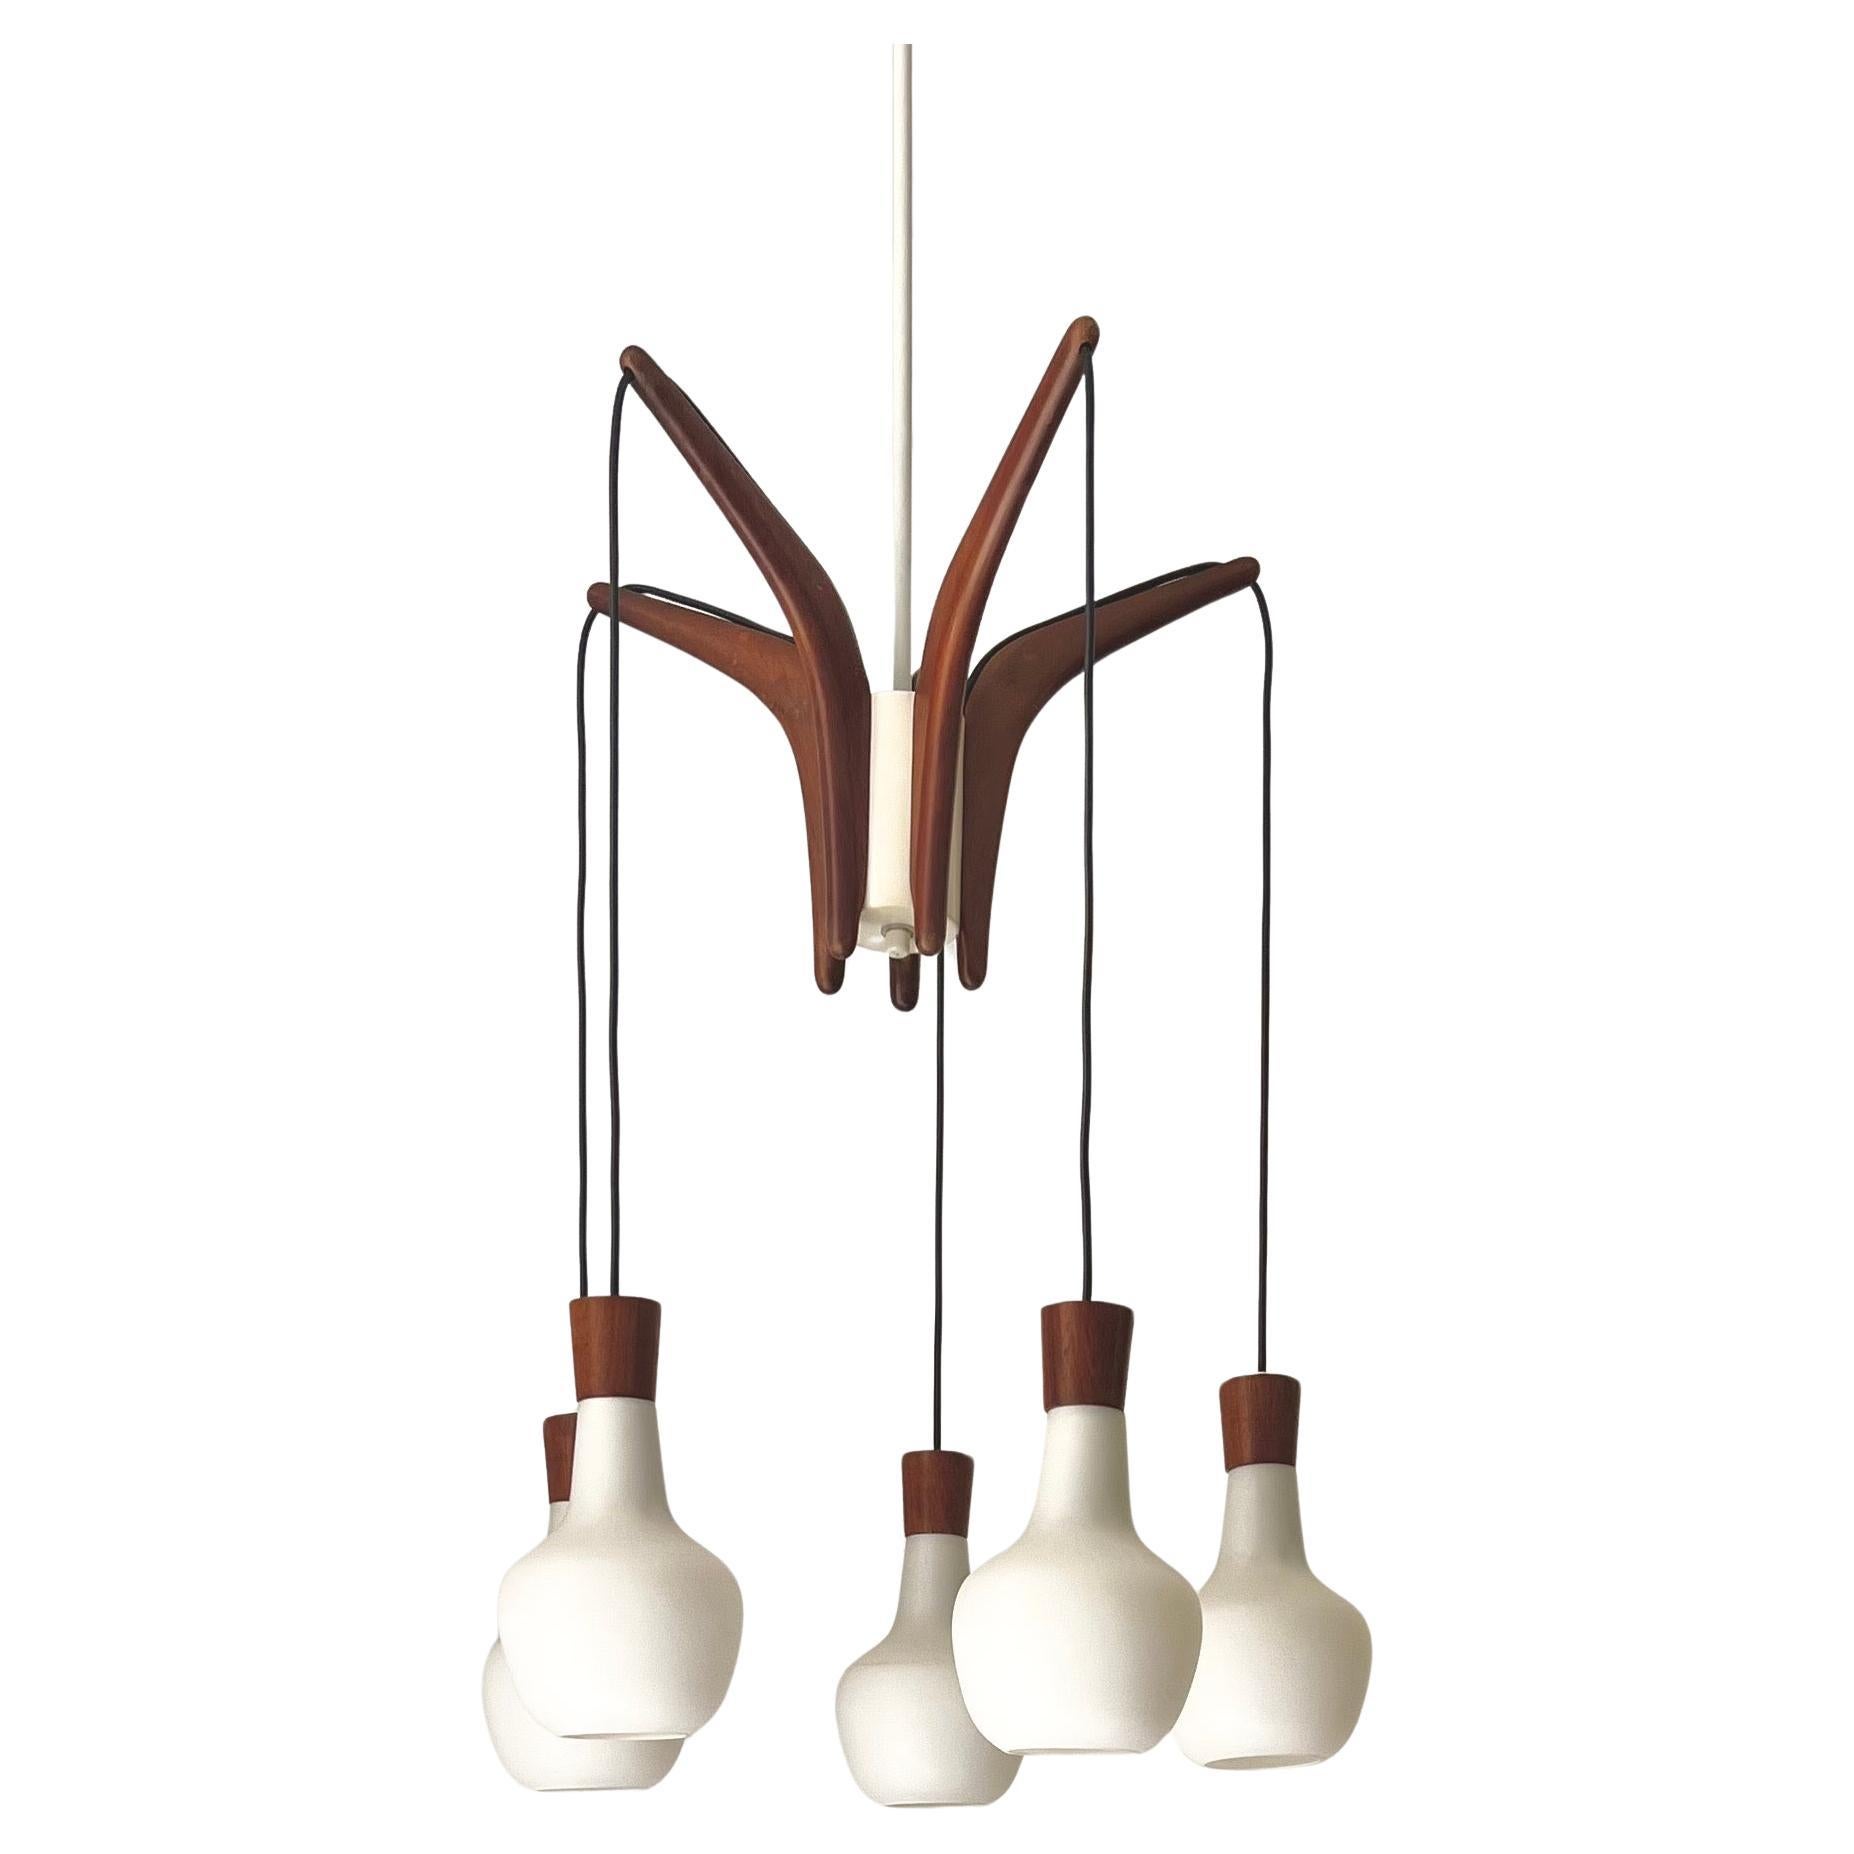 Teak and Glass Chandelier with Five Arms, Mid-20th Century, Sweden